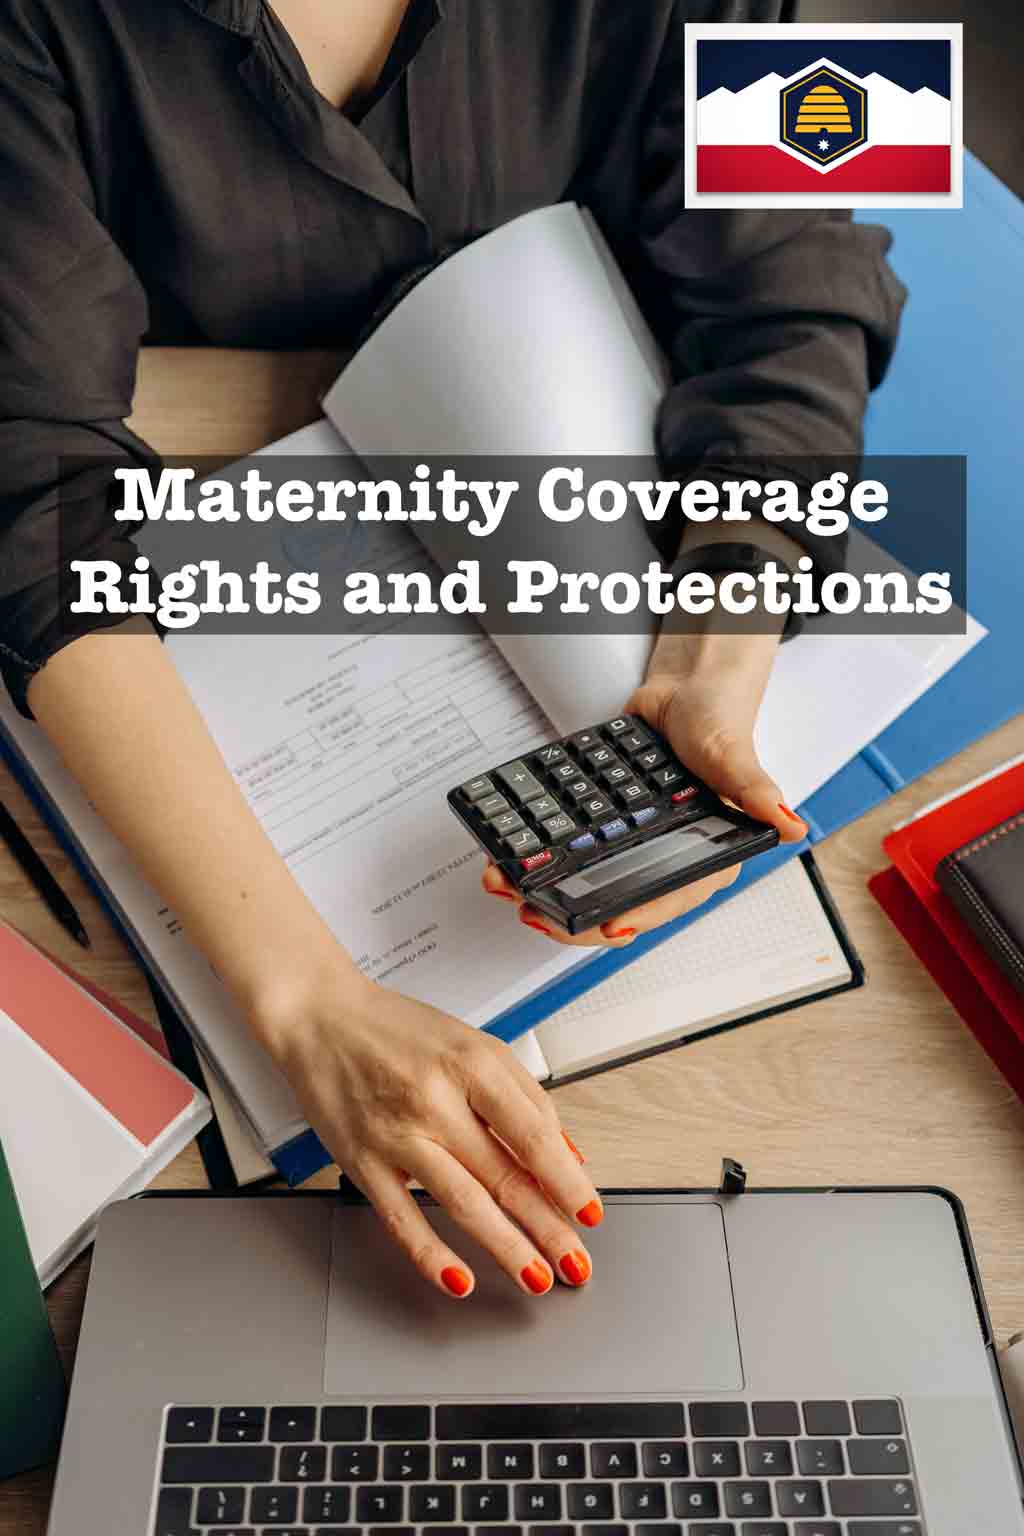 Maternity Coverage Rights and Protections